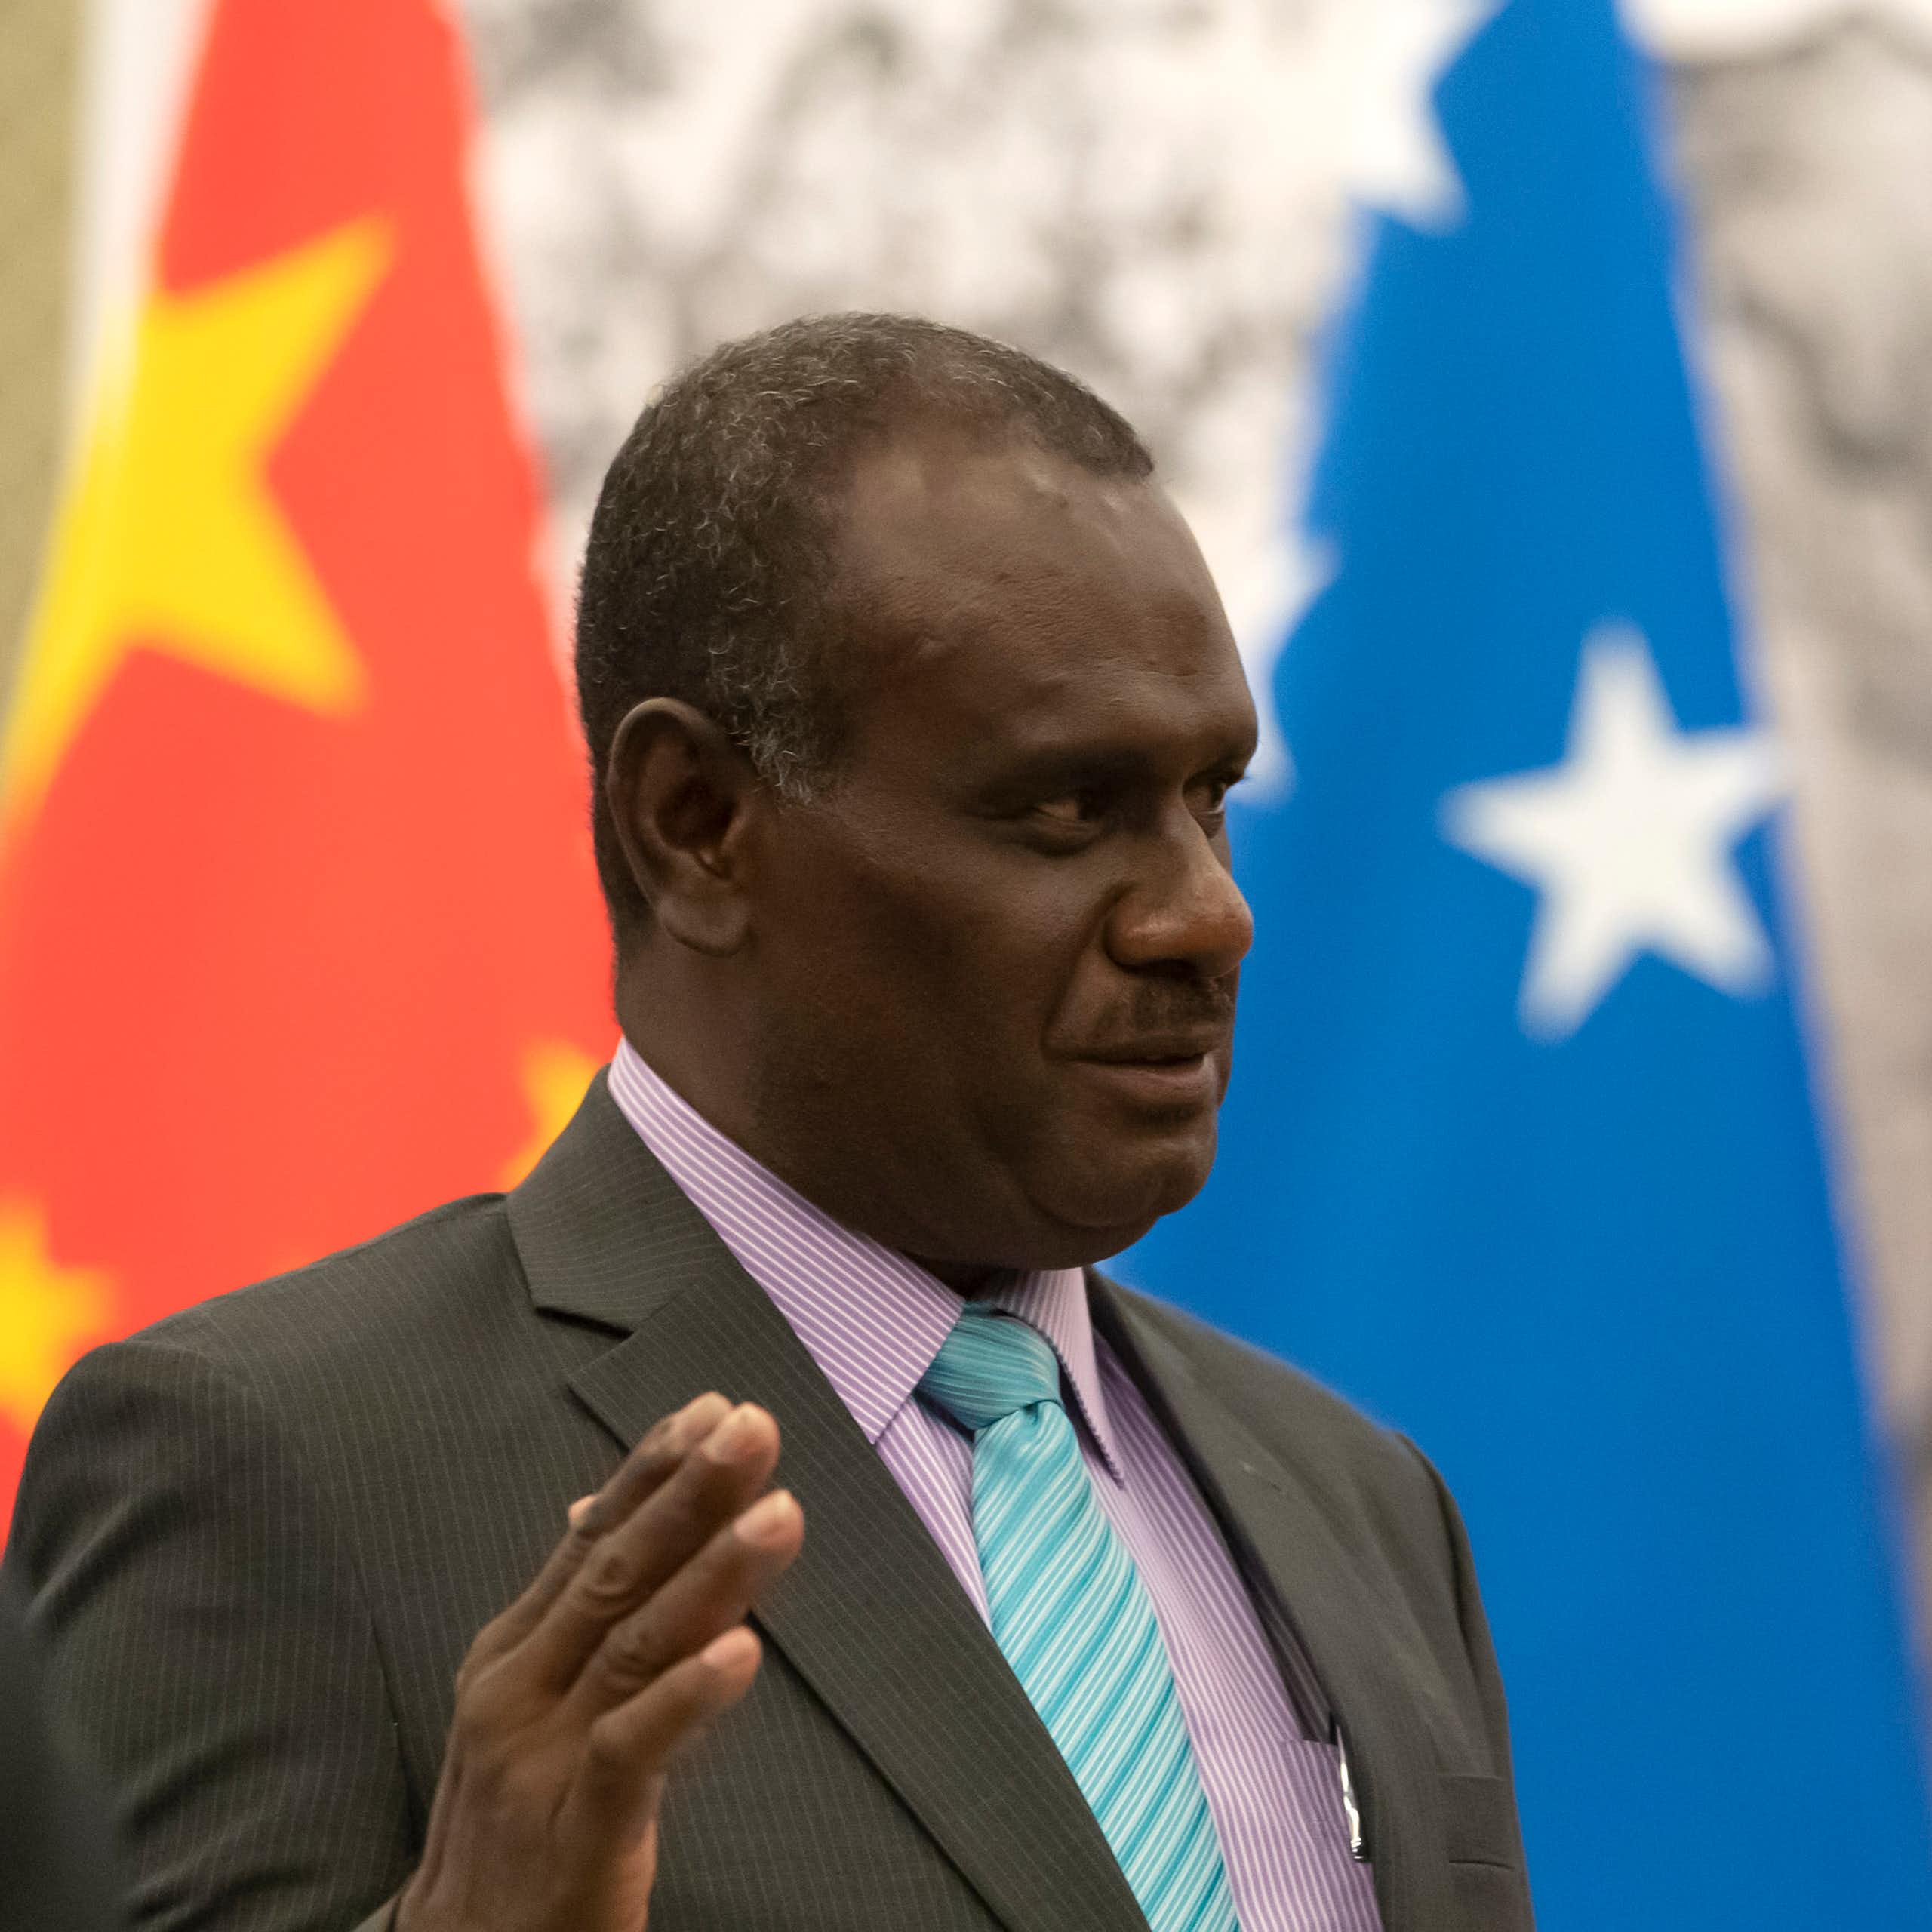 Will Solomon Islands’ new leader stay close to China?